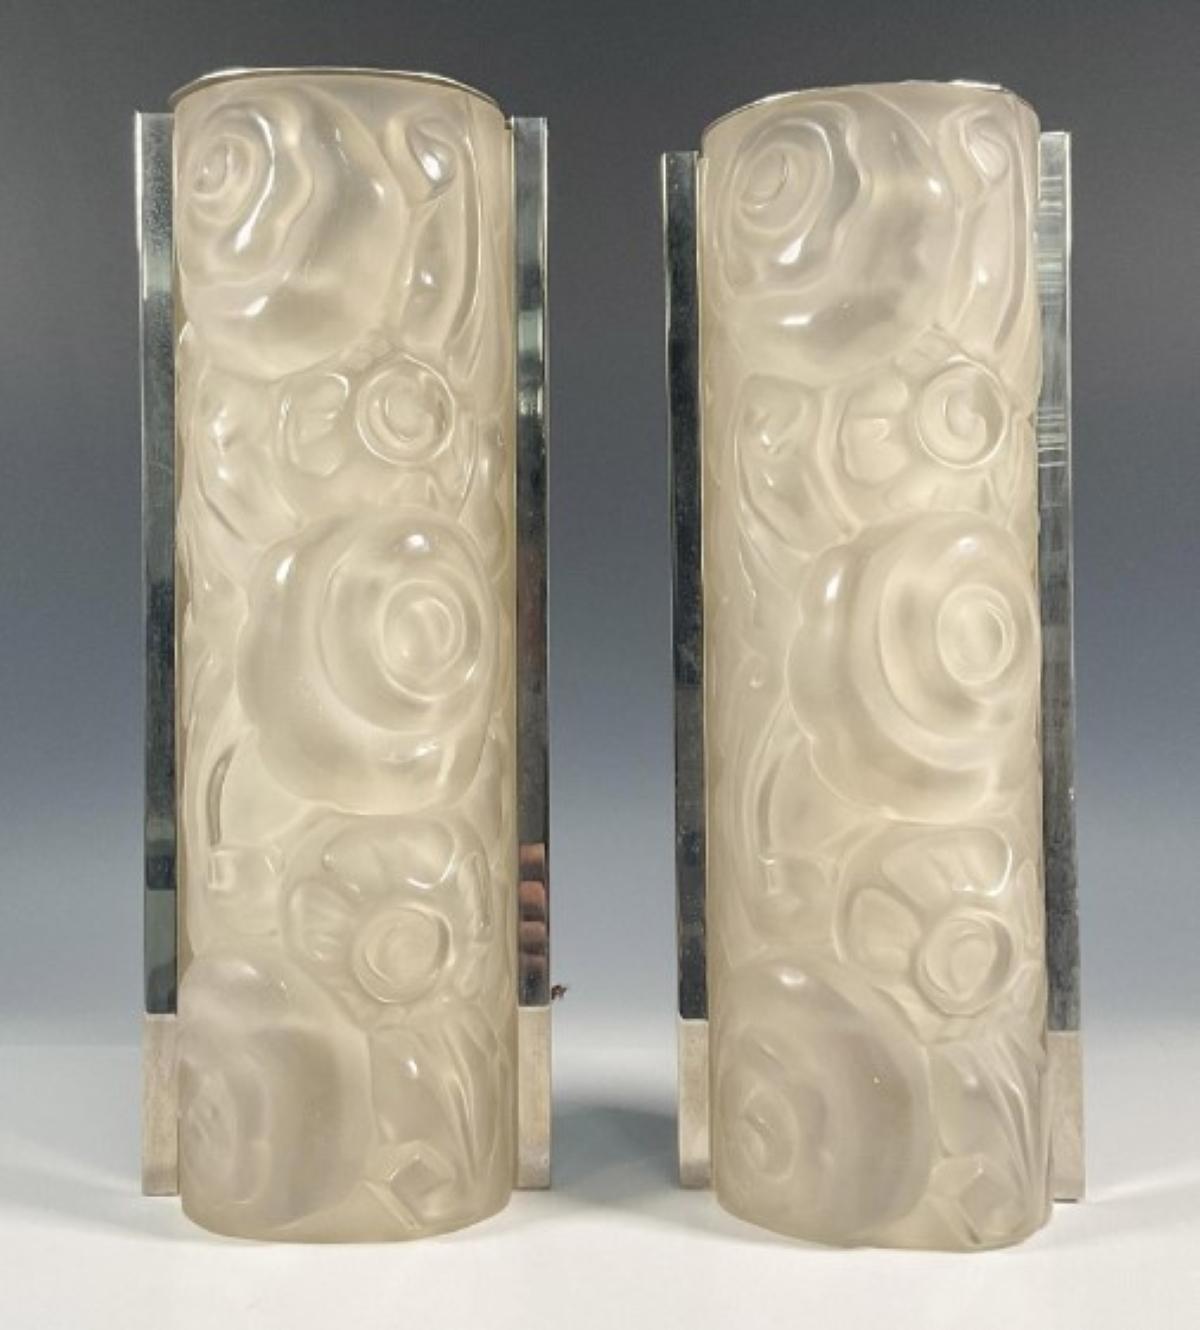 A pair of wall sconces by the French artist “Genet et Michon” in great condition. Clear frosted glass shades with flower motif details. Shades are held with nickel frames. These sconces have the added benefit that they can be hung horizontally or